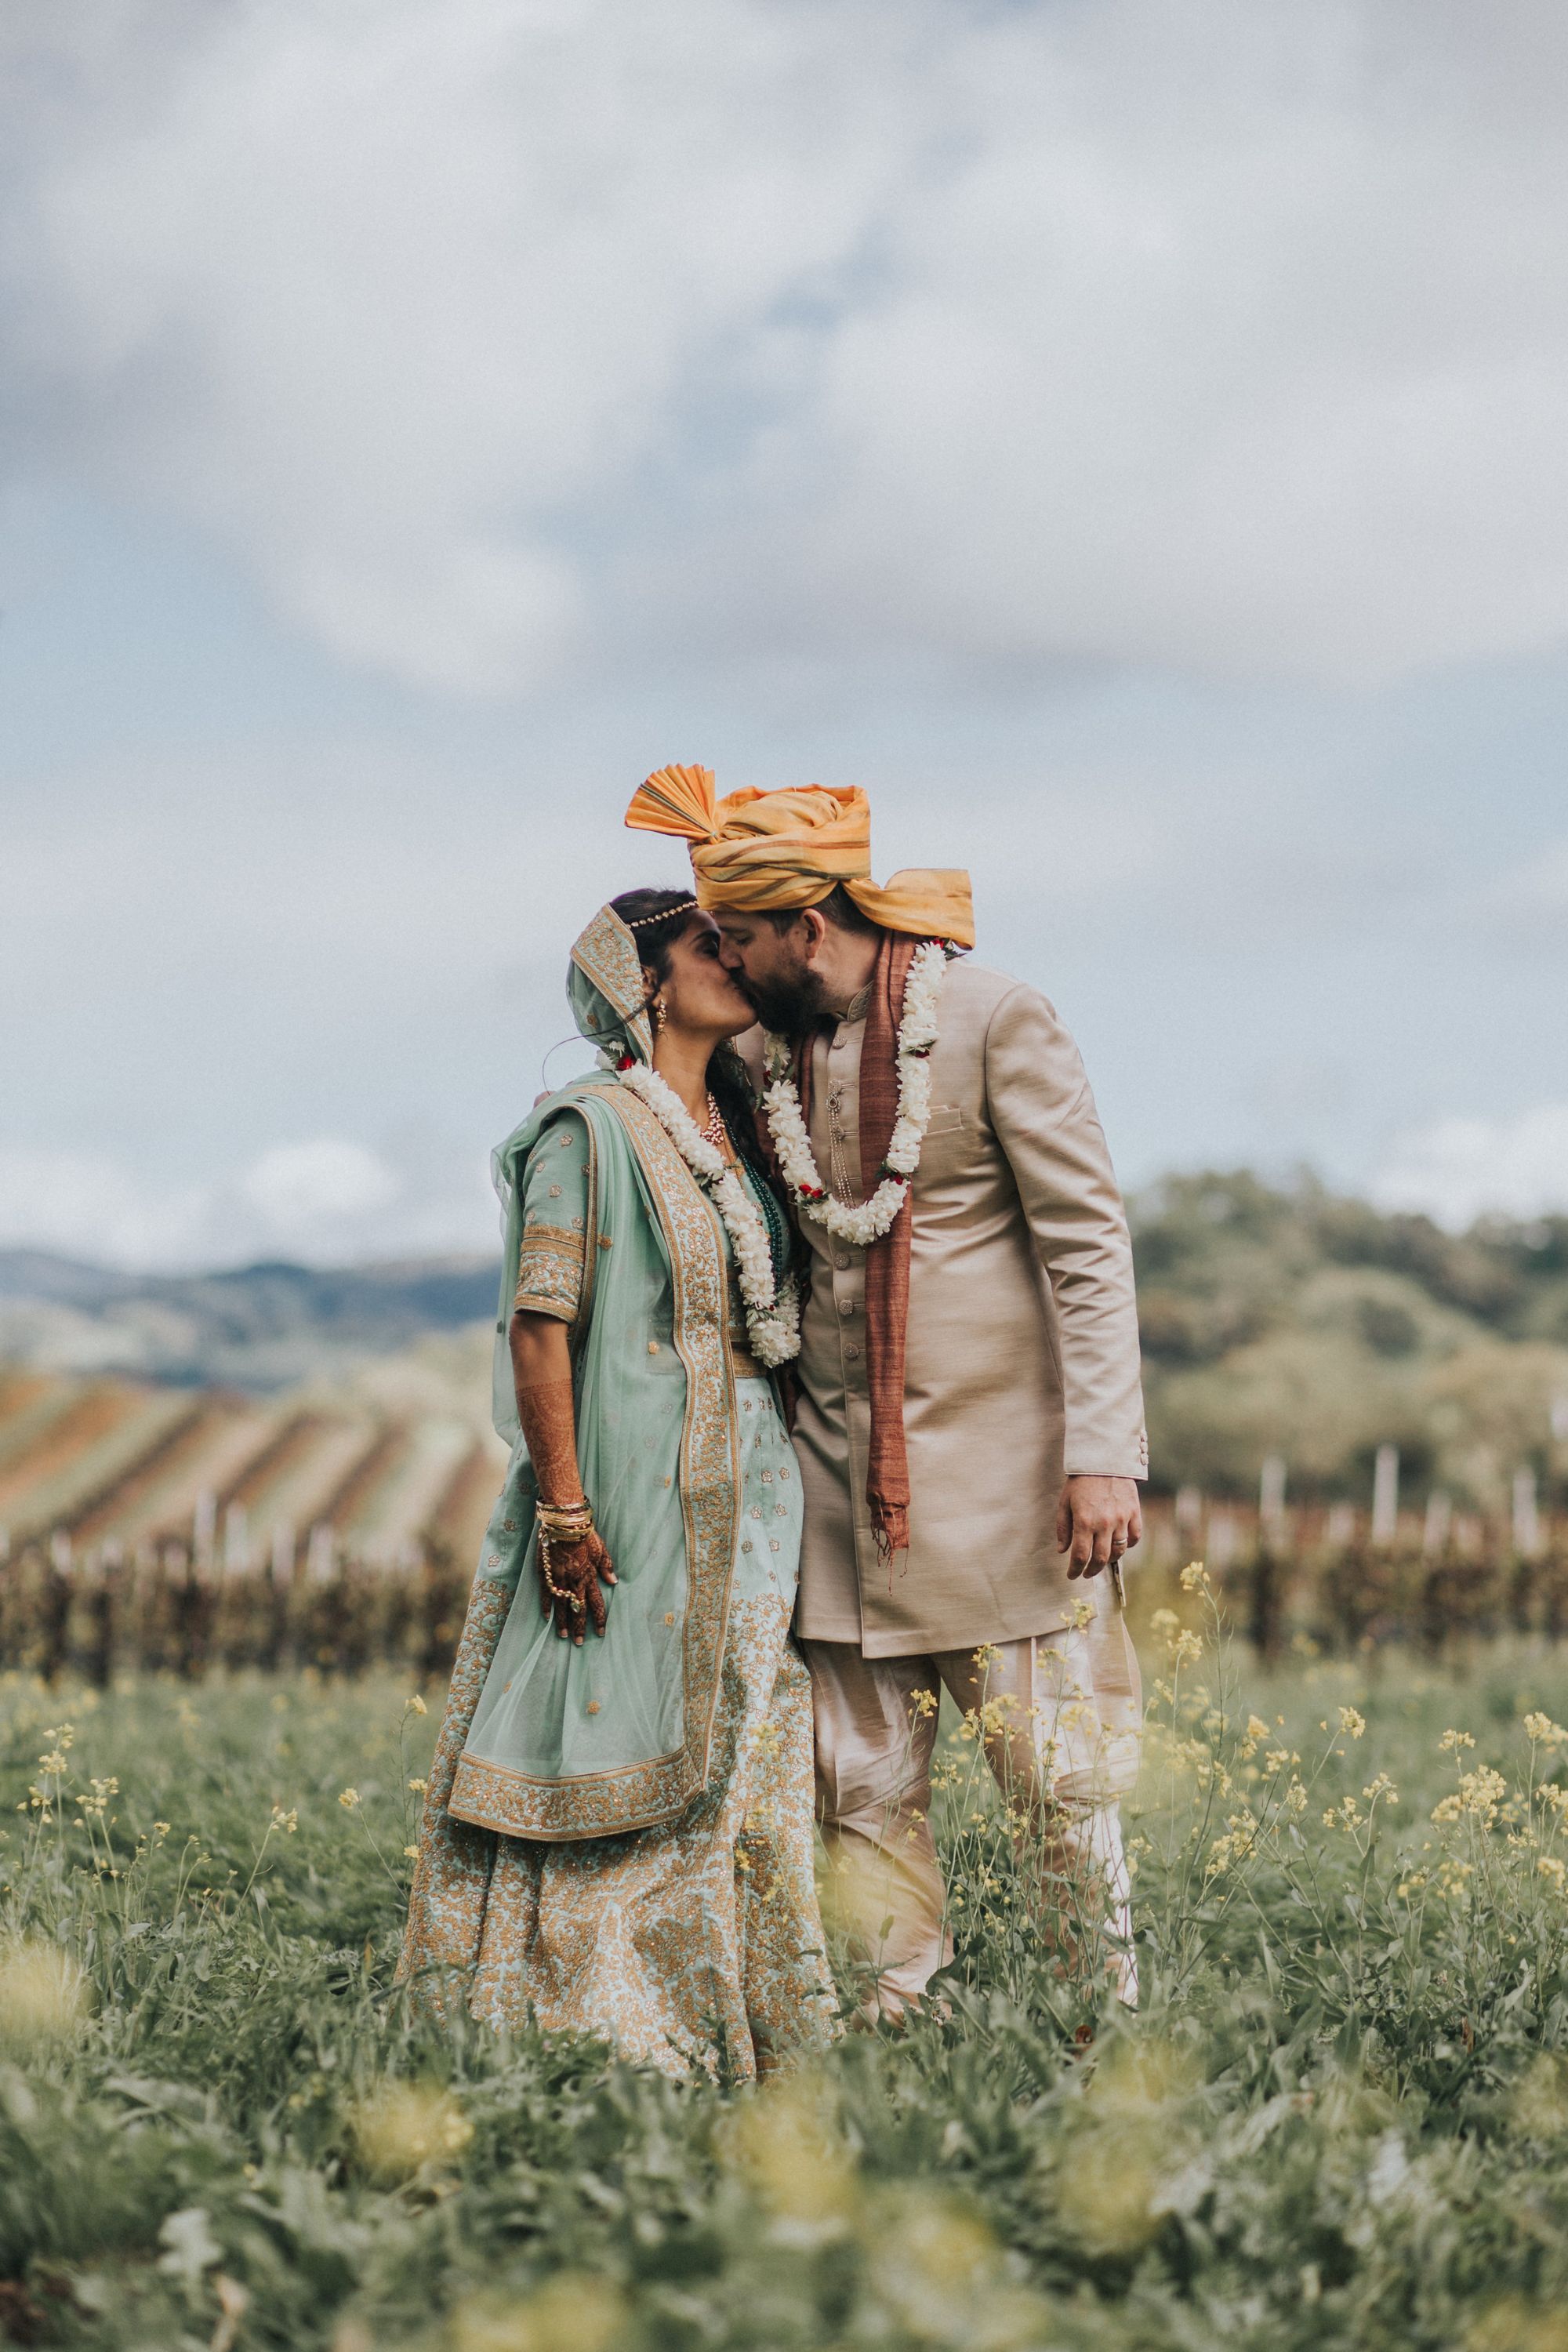 Portrait of newlywed couple in traditional dress outdoors.